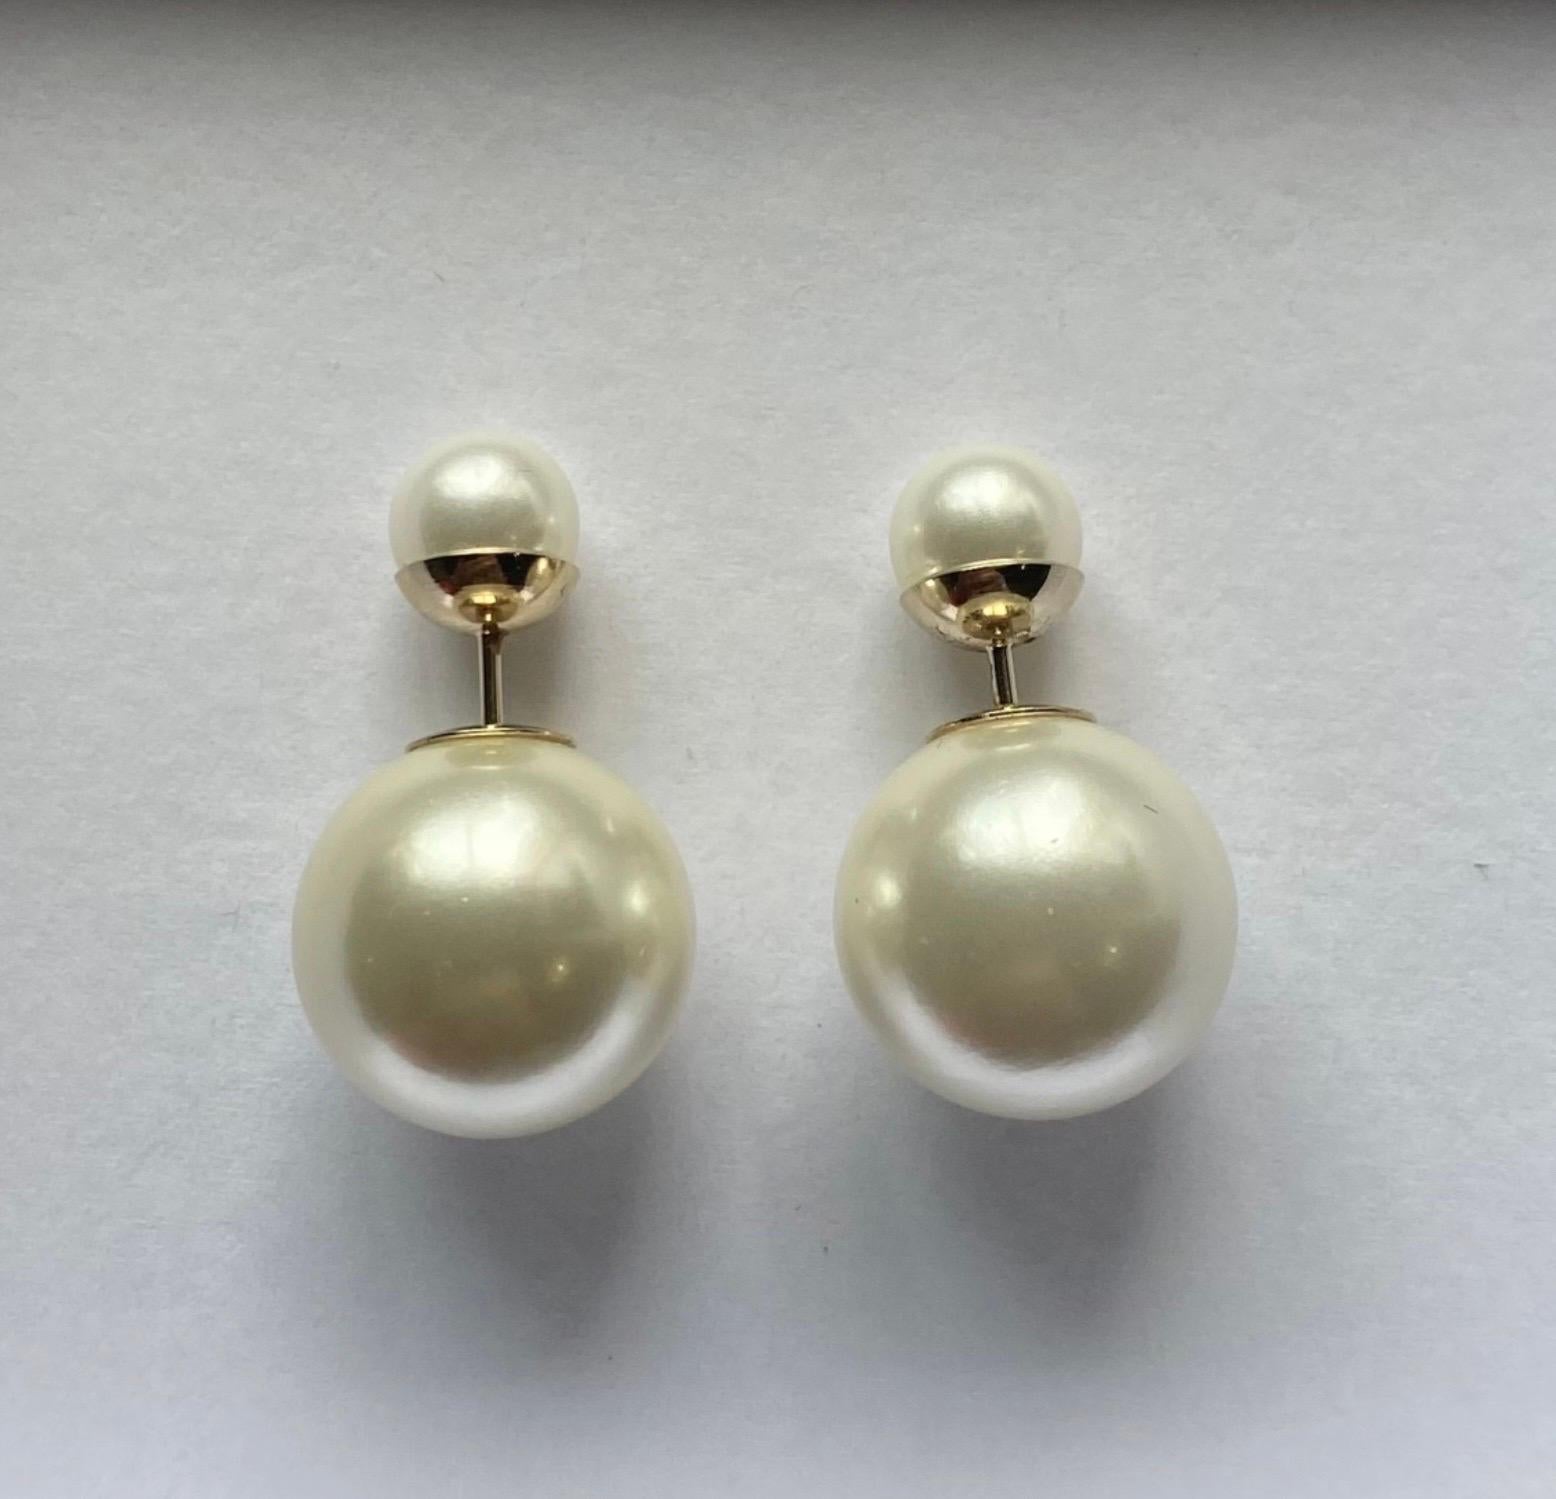 Dior tribal earrings, hole closure, featuring a large pearl on the front and a small pearl on the back, the metal parts are gold-colored, new, never used with box, the size of the large pearl has a diameter of 1.5cm